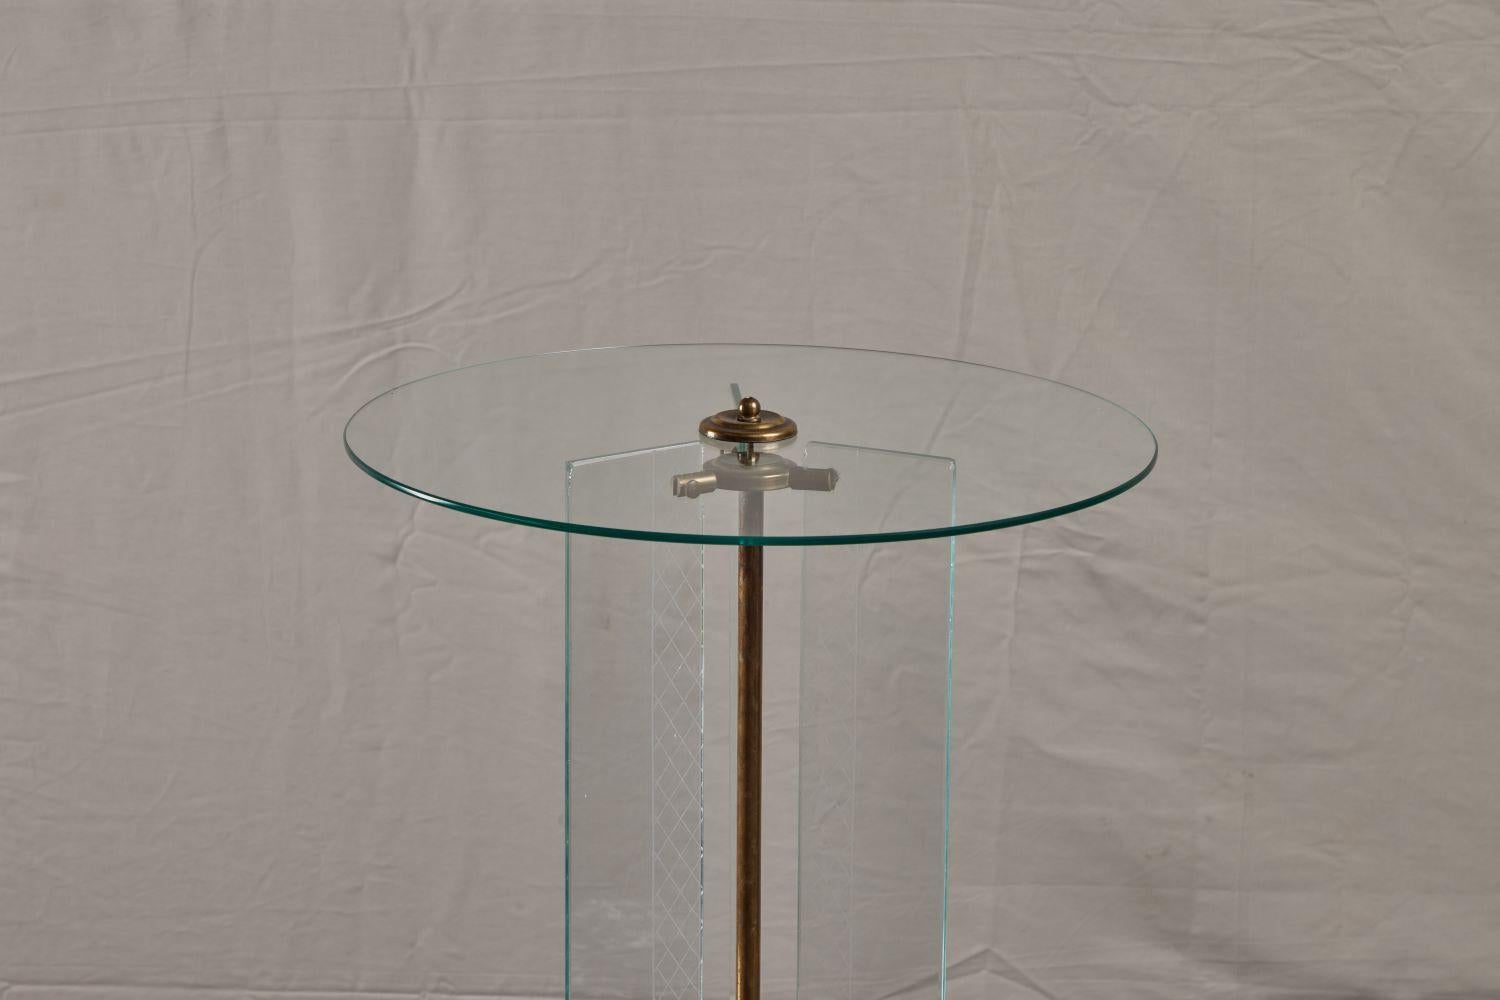 Italian Etched glass and brass Art Deco side table from the 1930’s.